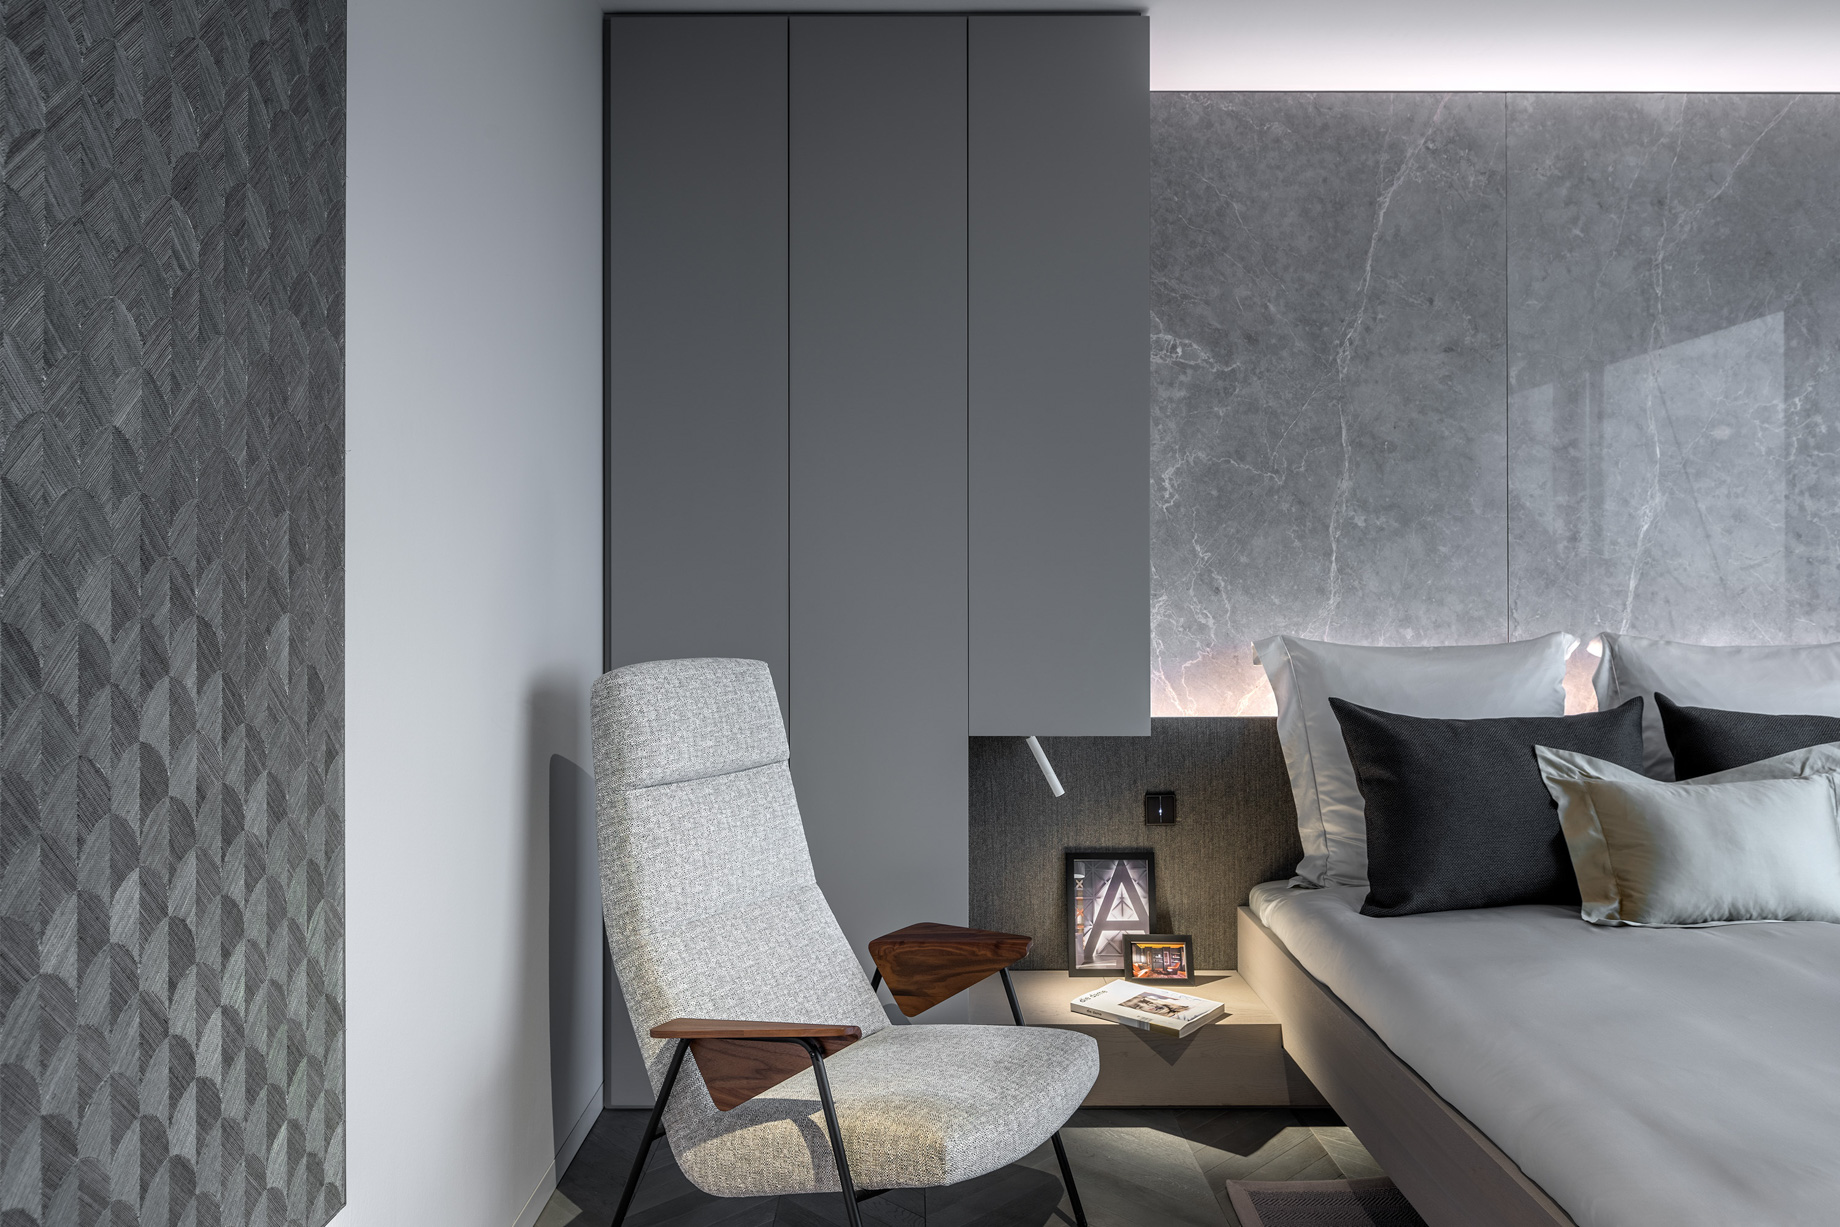 Shades of Grey Apartment Interior Design Shanghai, China – Ippolito Fleitz Group – Bedroom Lounge Chair and Bedside Table